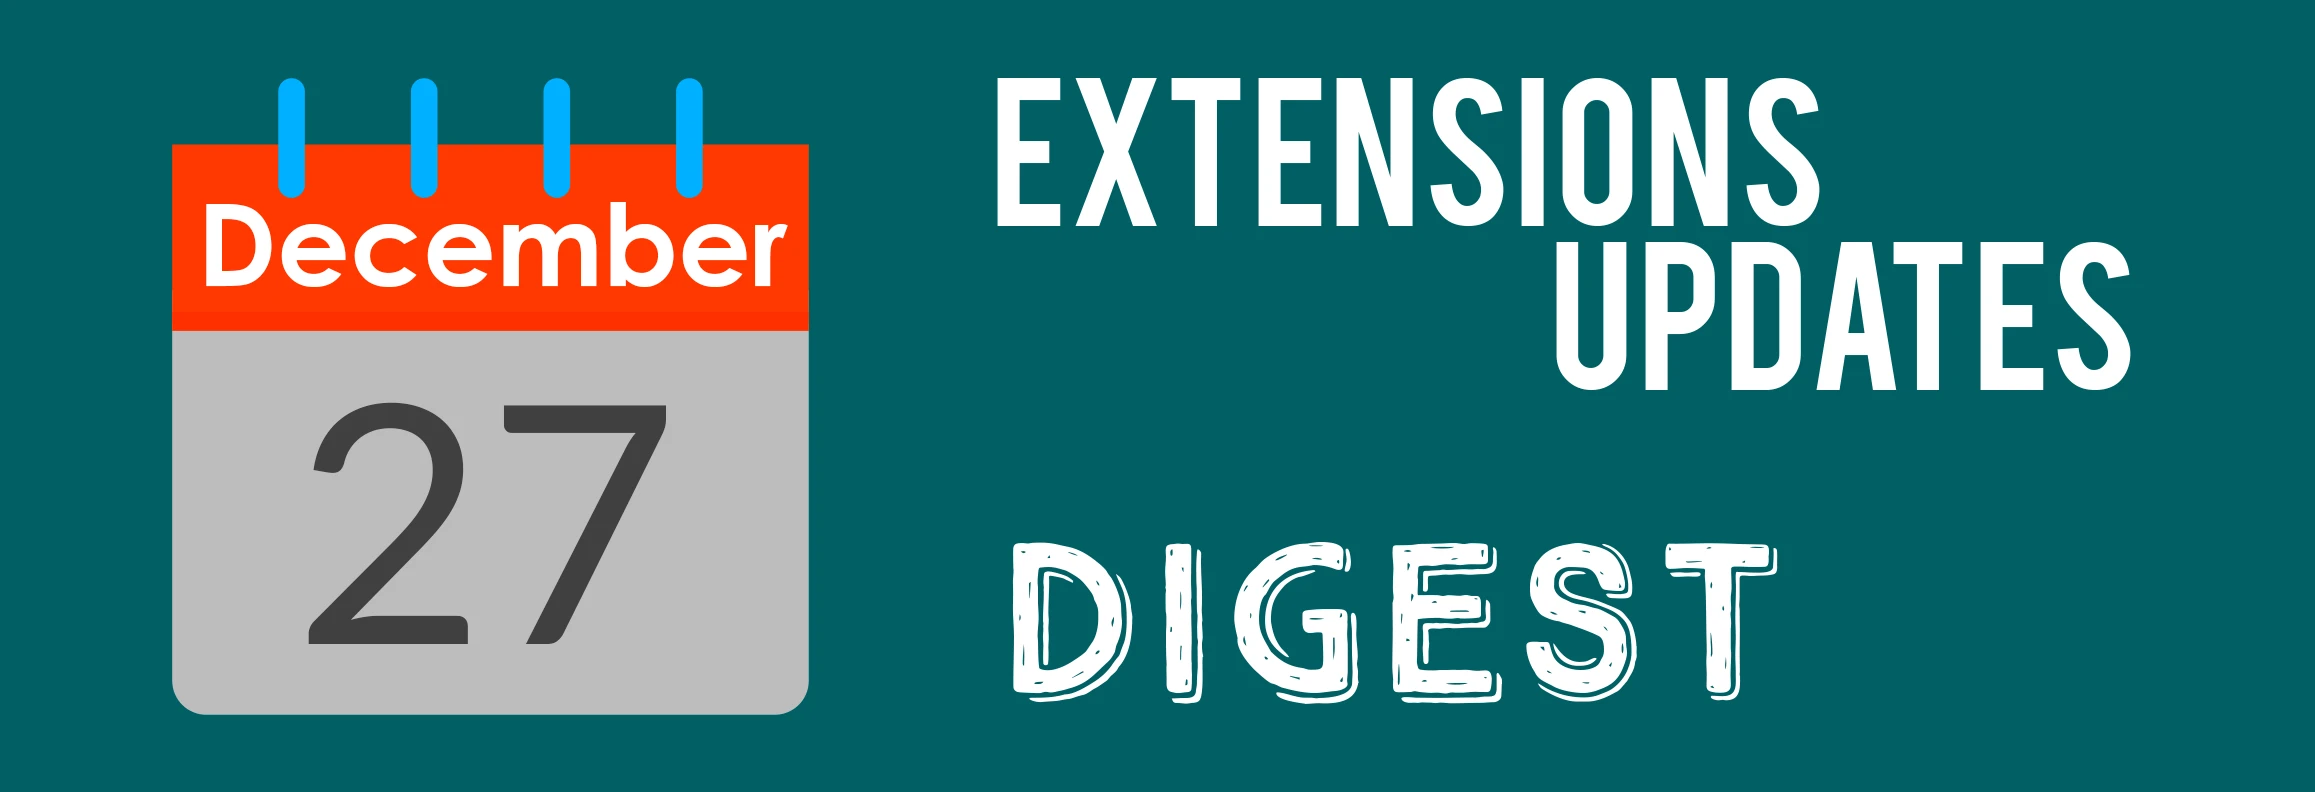 Mirasvit Latest (and the last in 2016) Extensions Update Digest